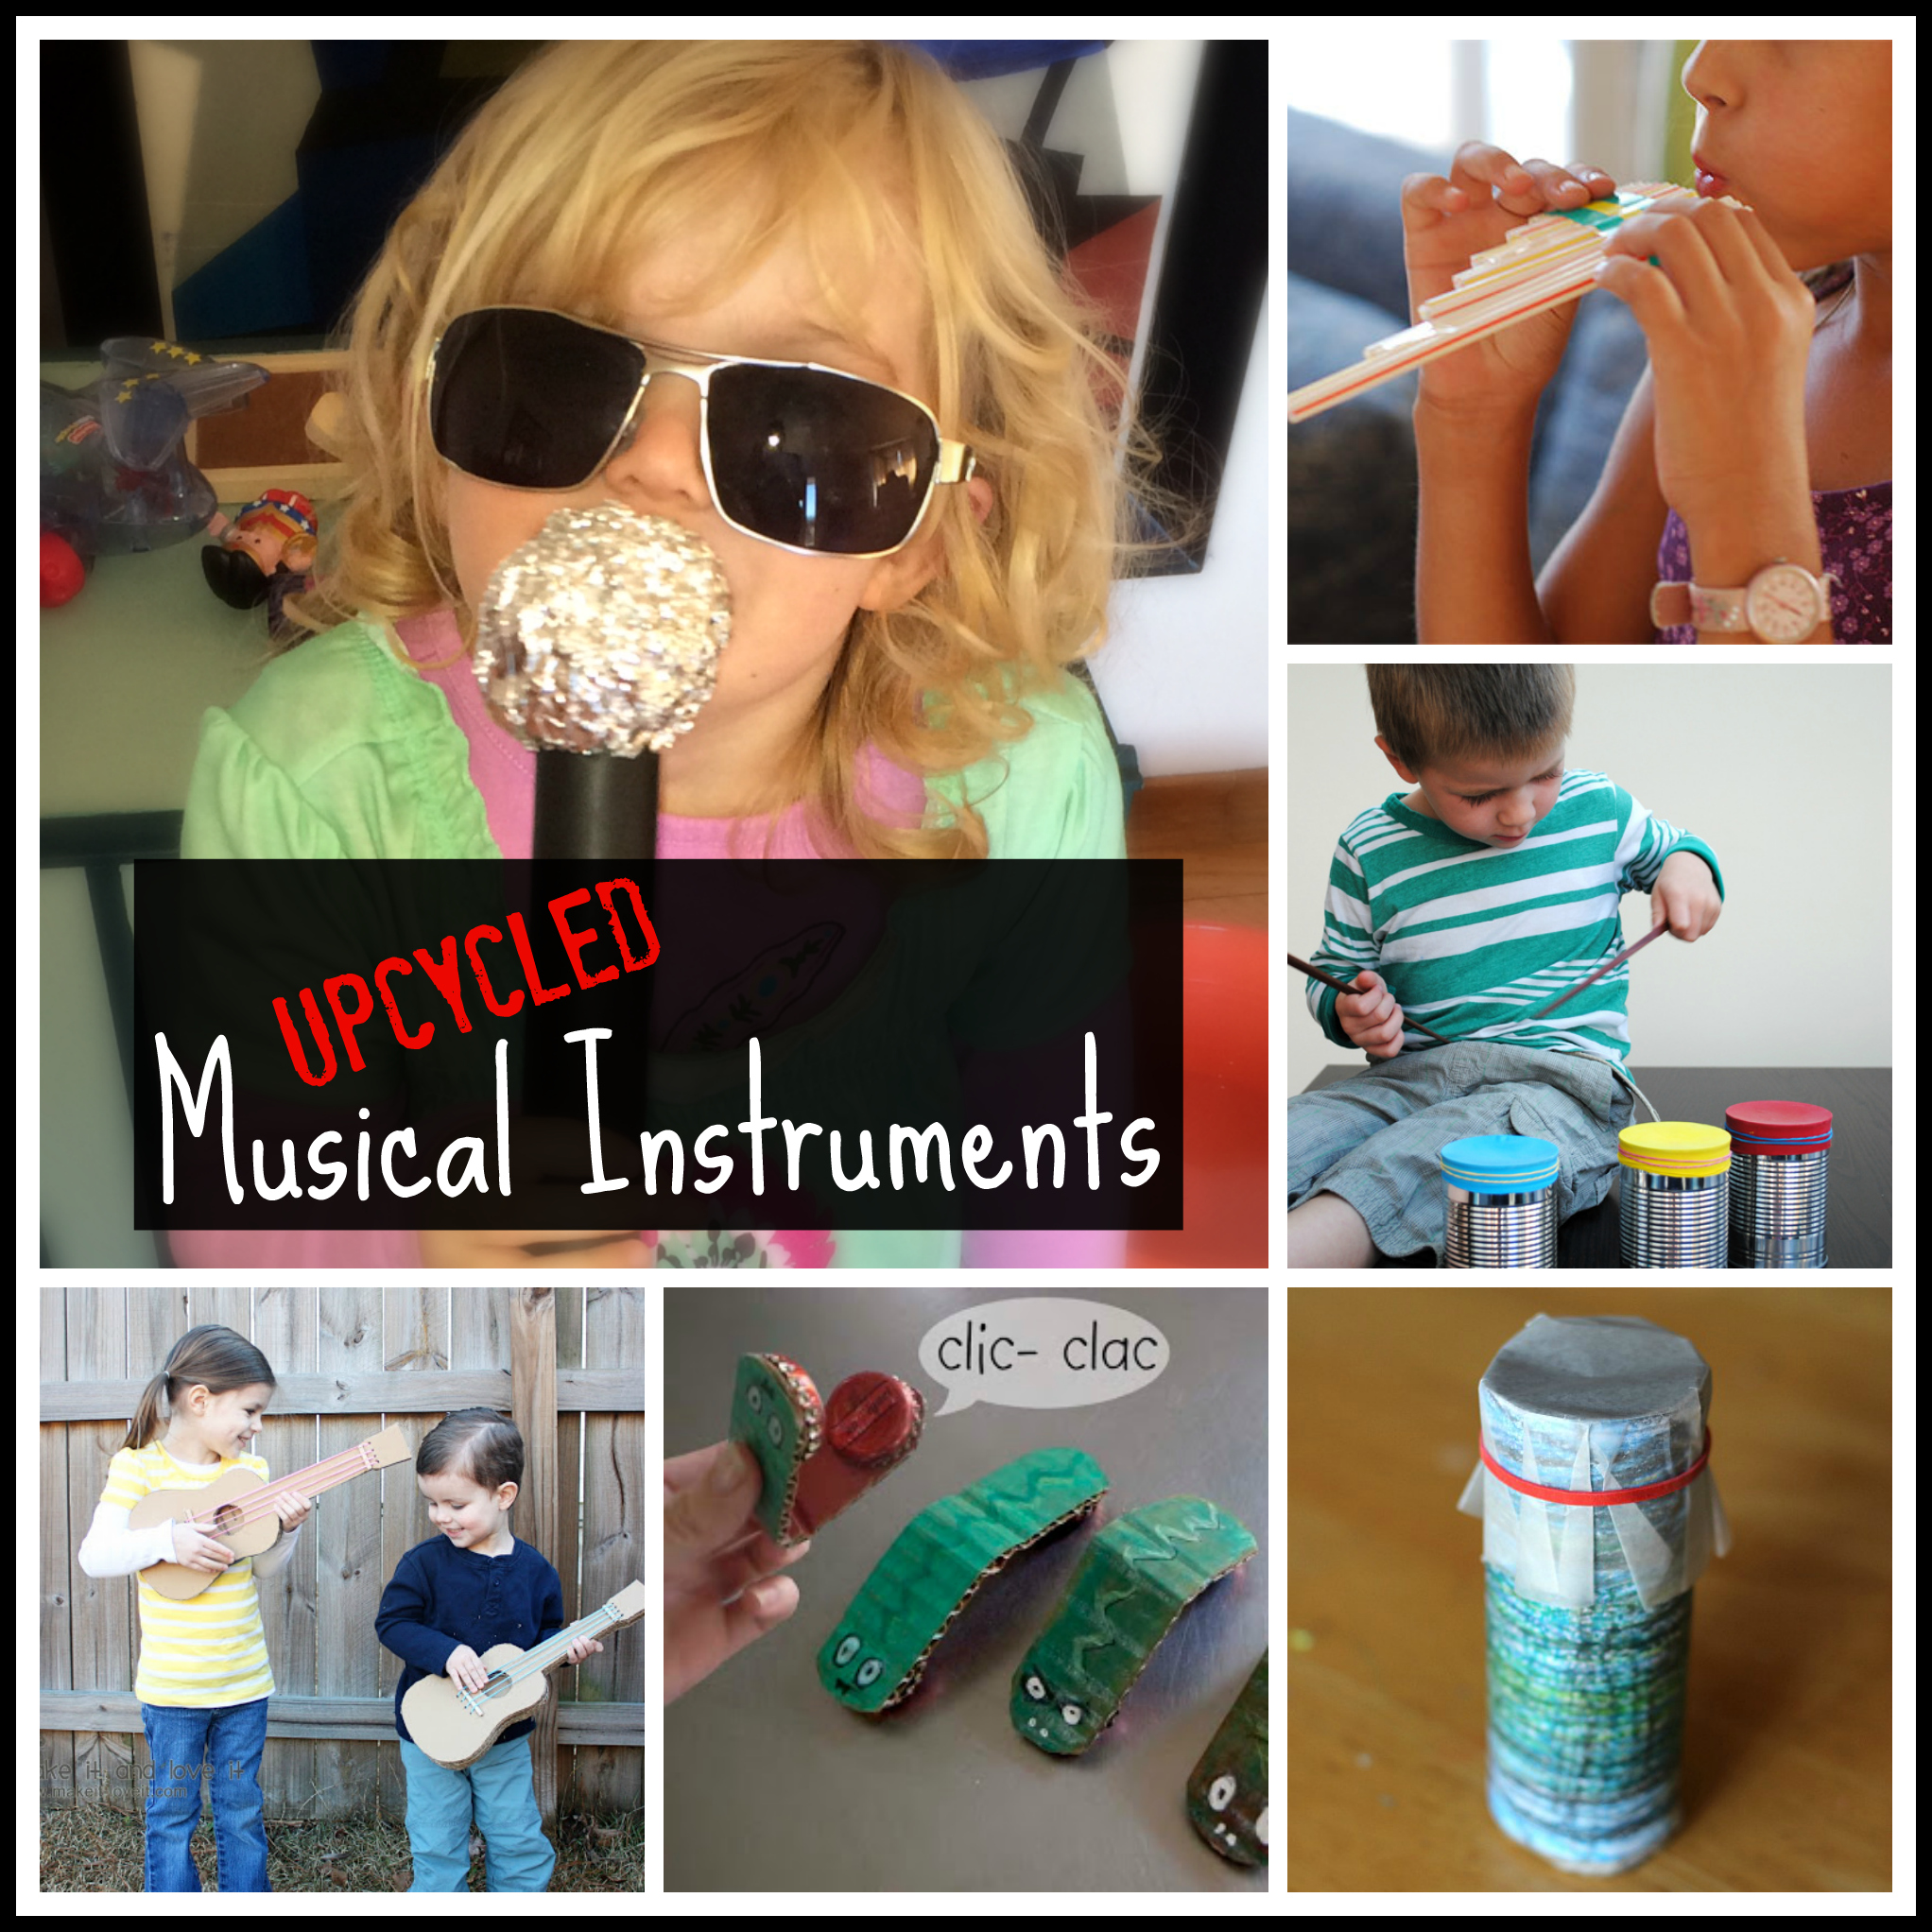 upcycled musical instruments